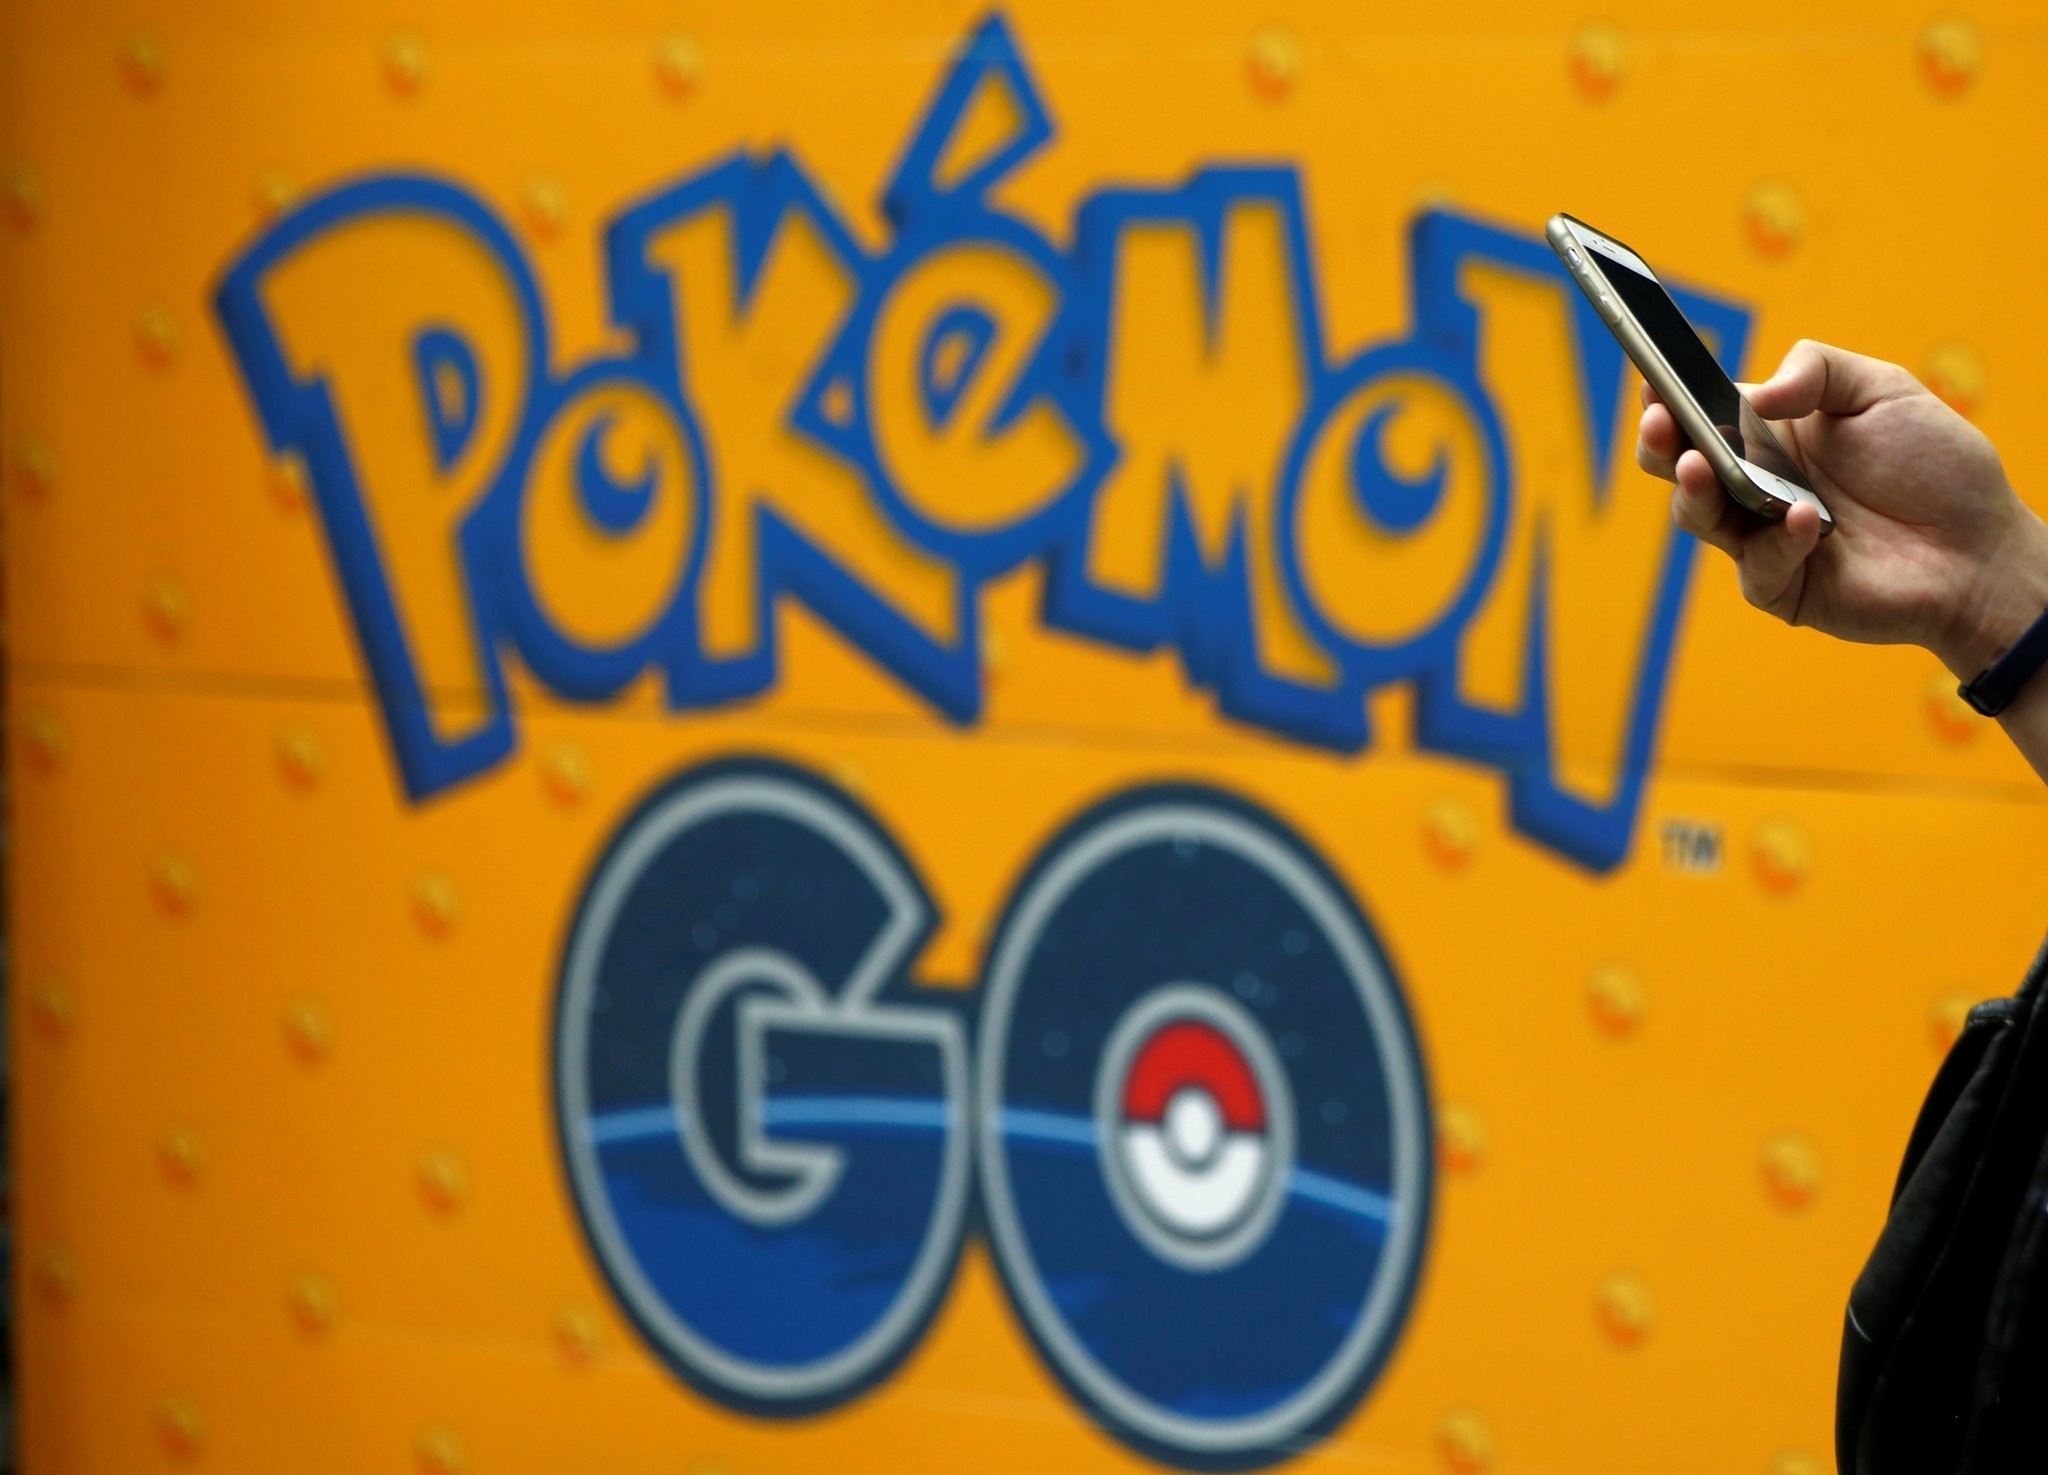 A man uses a mobile phone in front of an advertisement board bearing the image of Pokemon Go at an electronic shop in Tokyo, Japan, July 27, 2016. (REUTERS Photo)